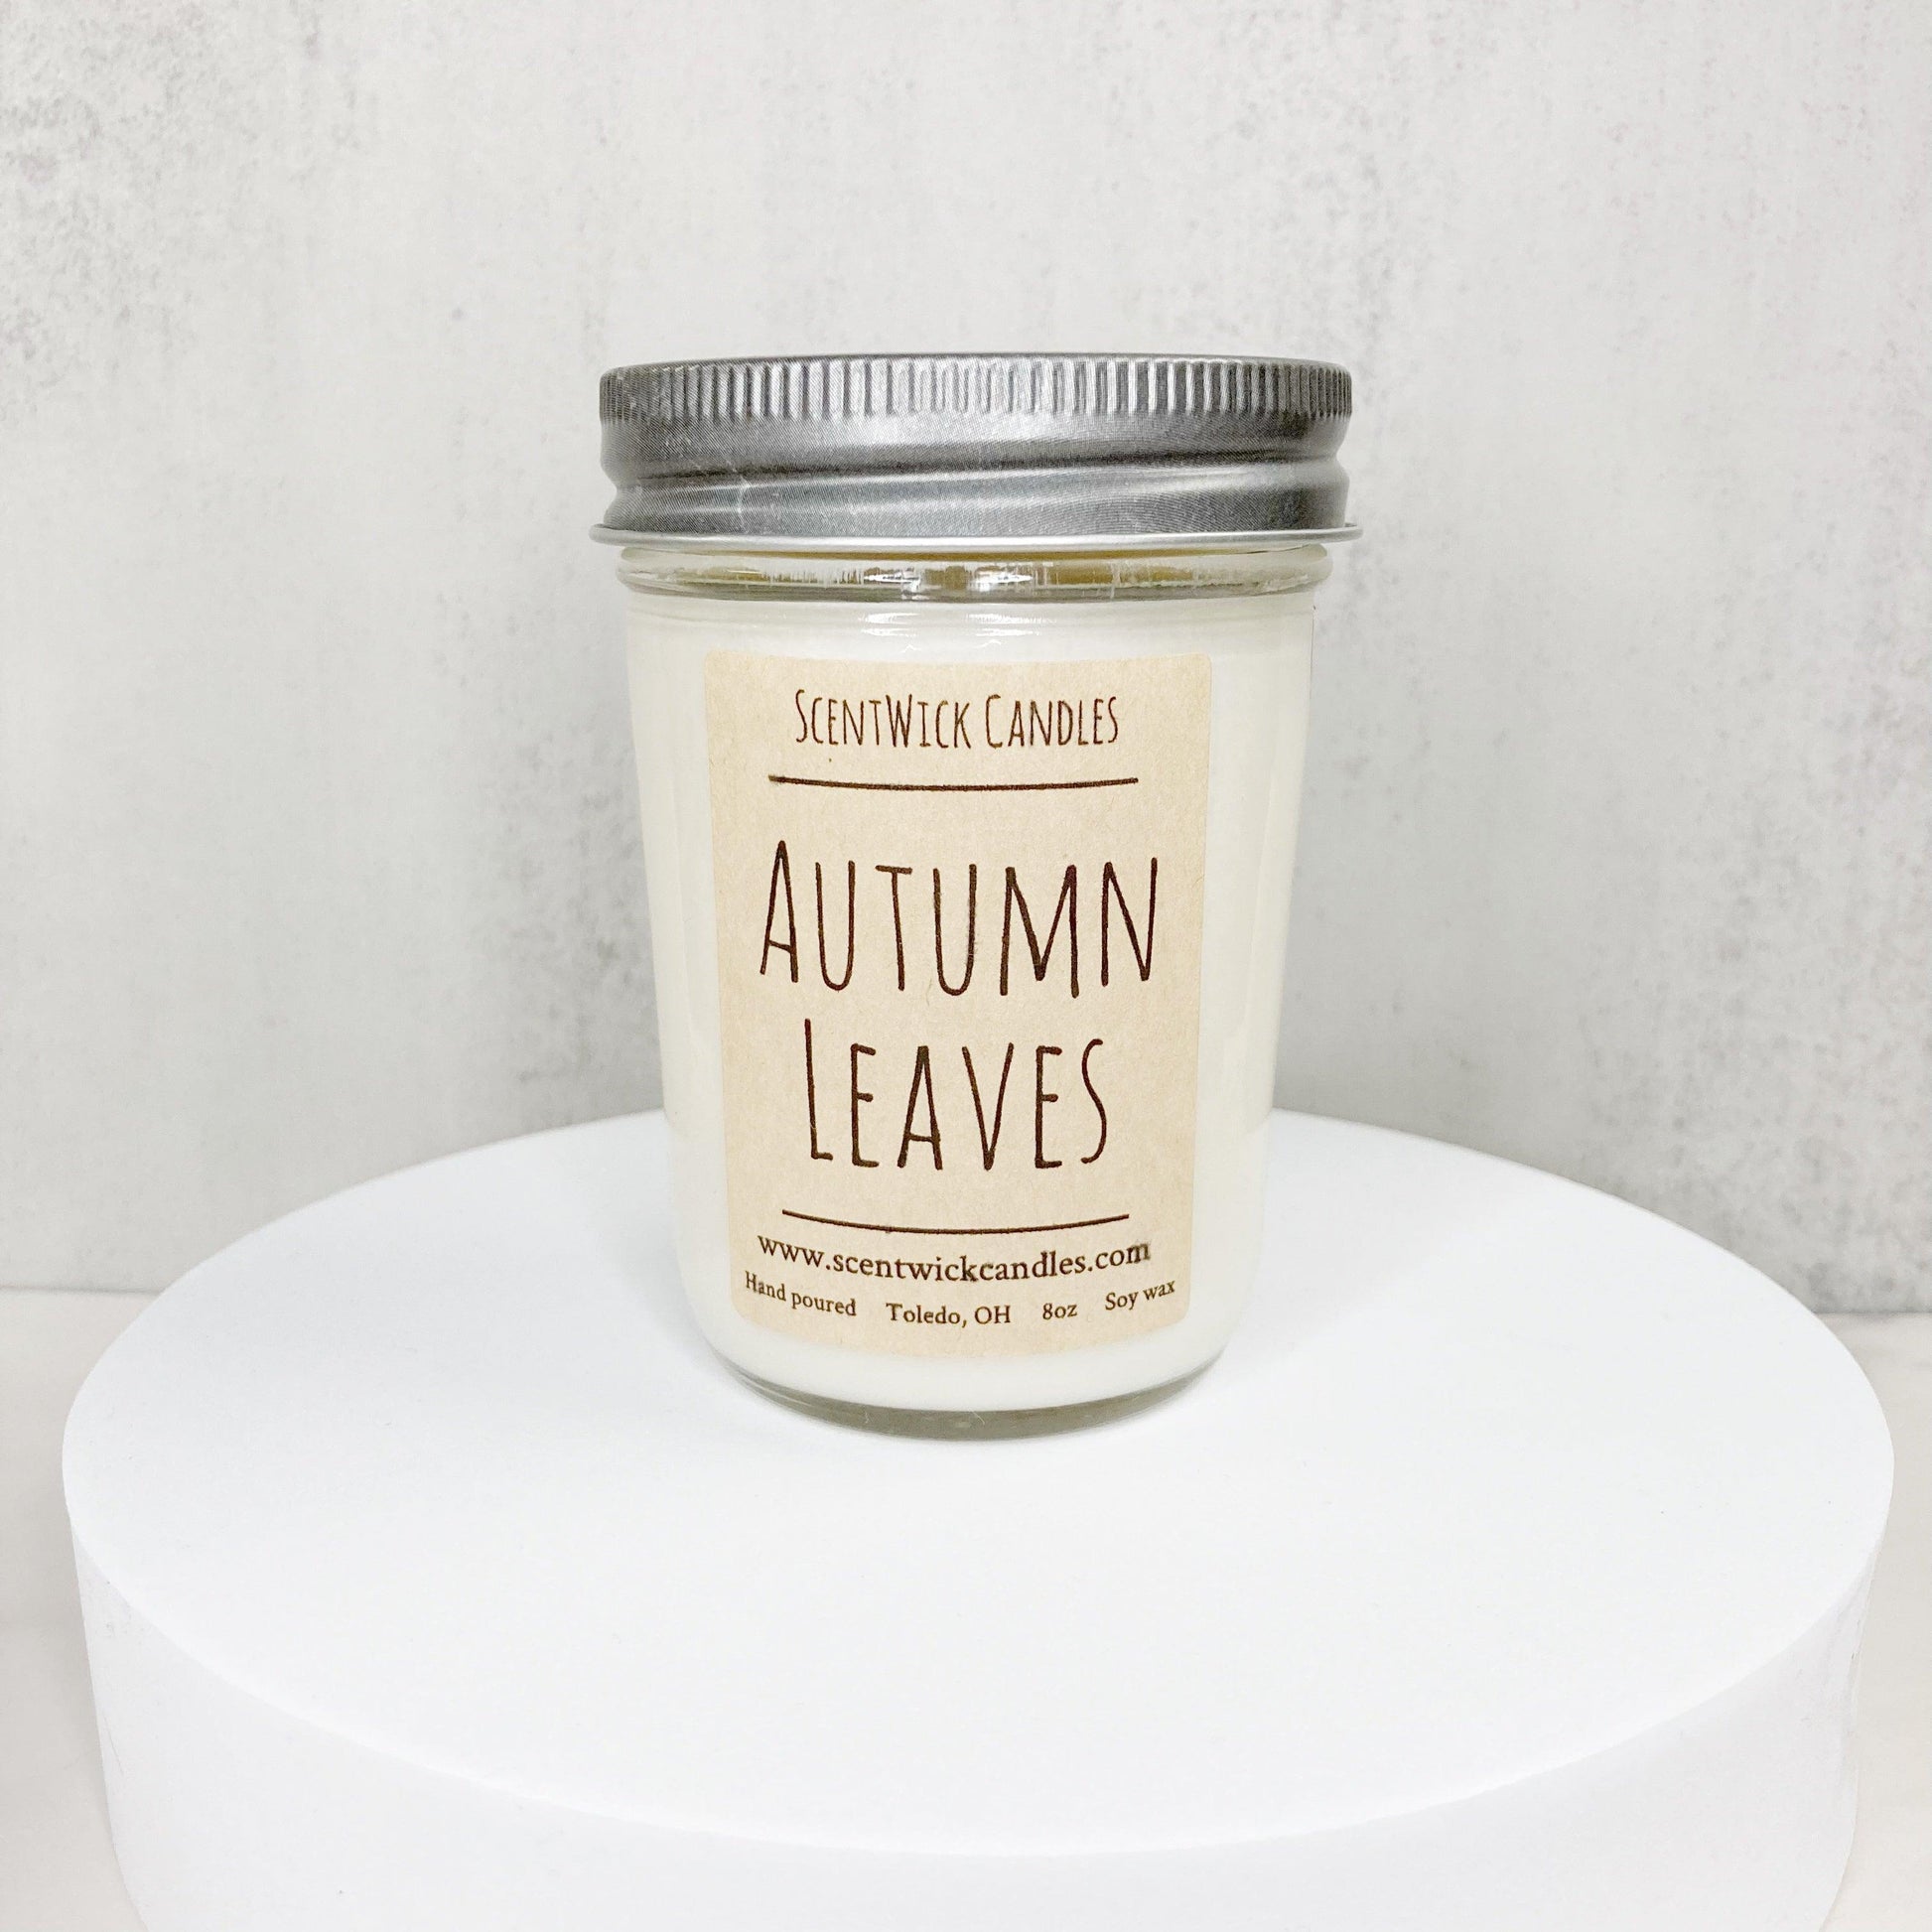 Autumn Leaves Candle - ScentWick Candles